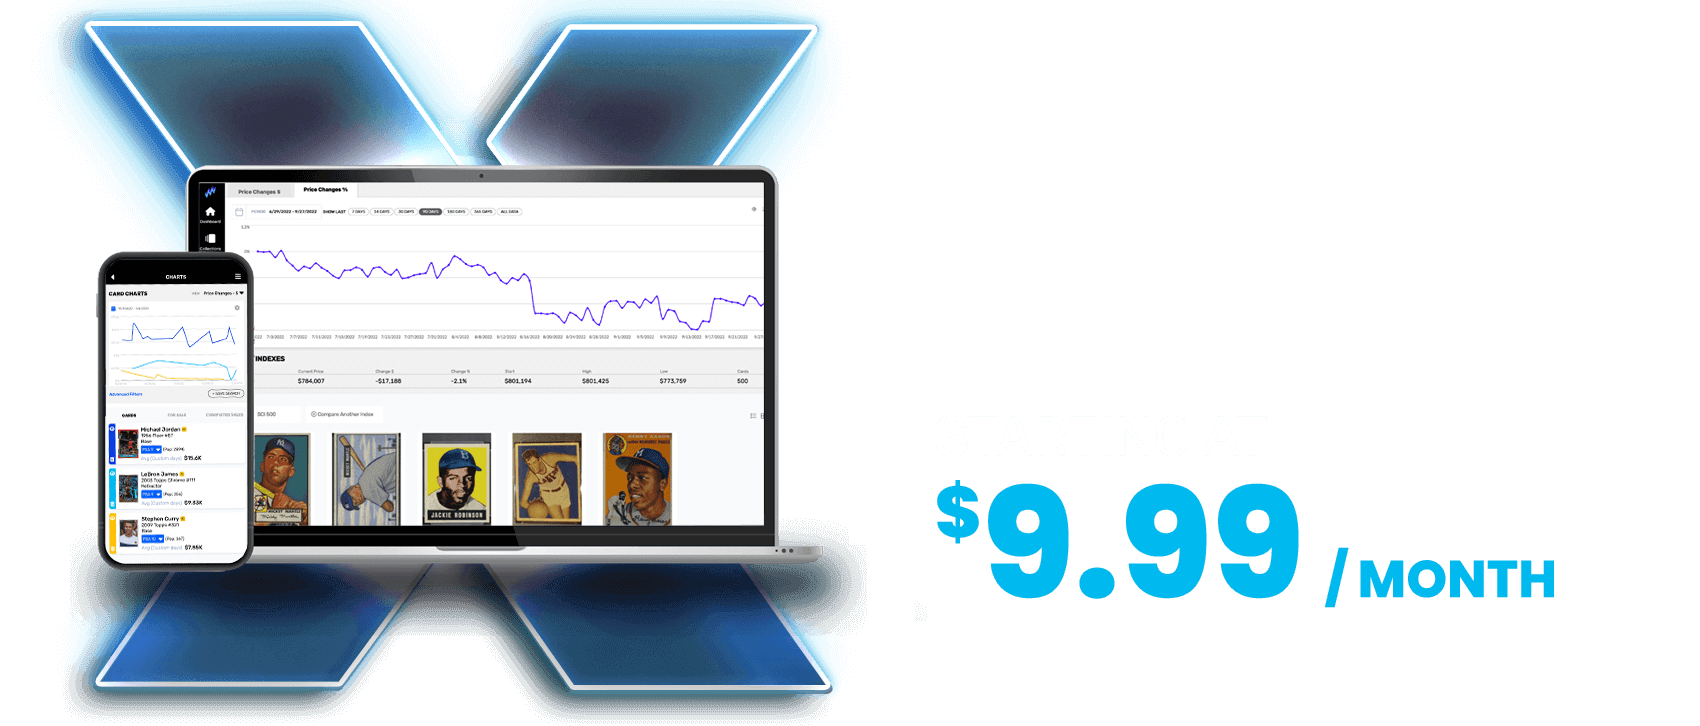 Market Movers Starting At $9.99 per month